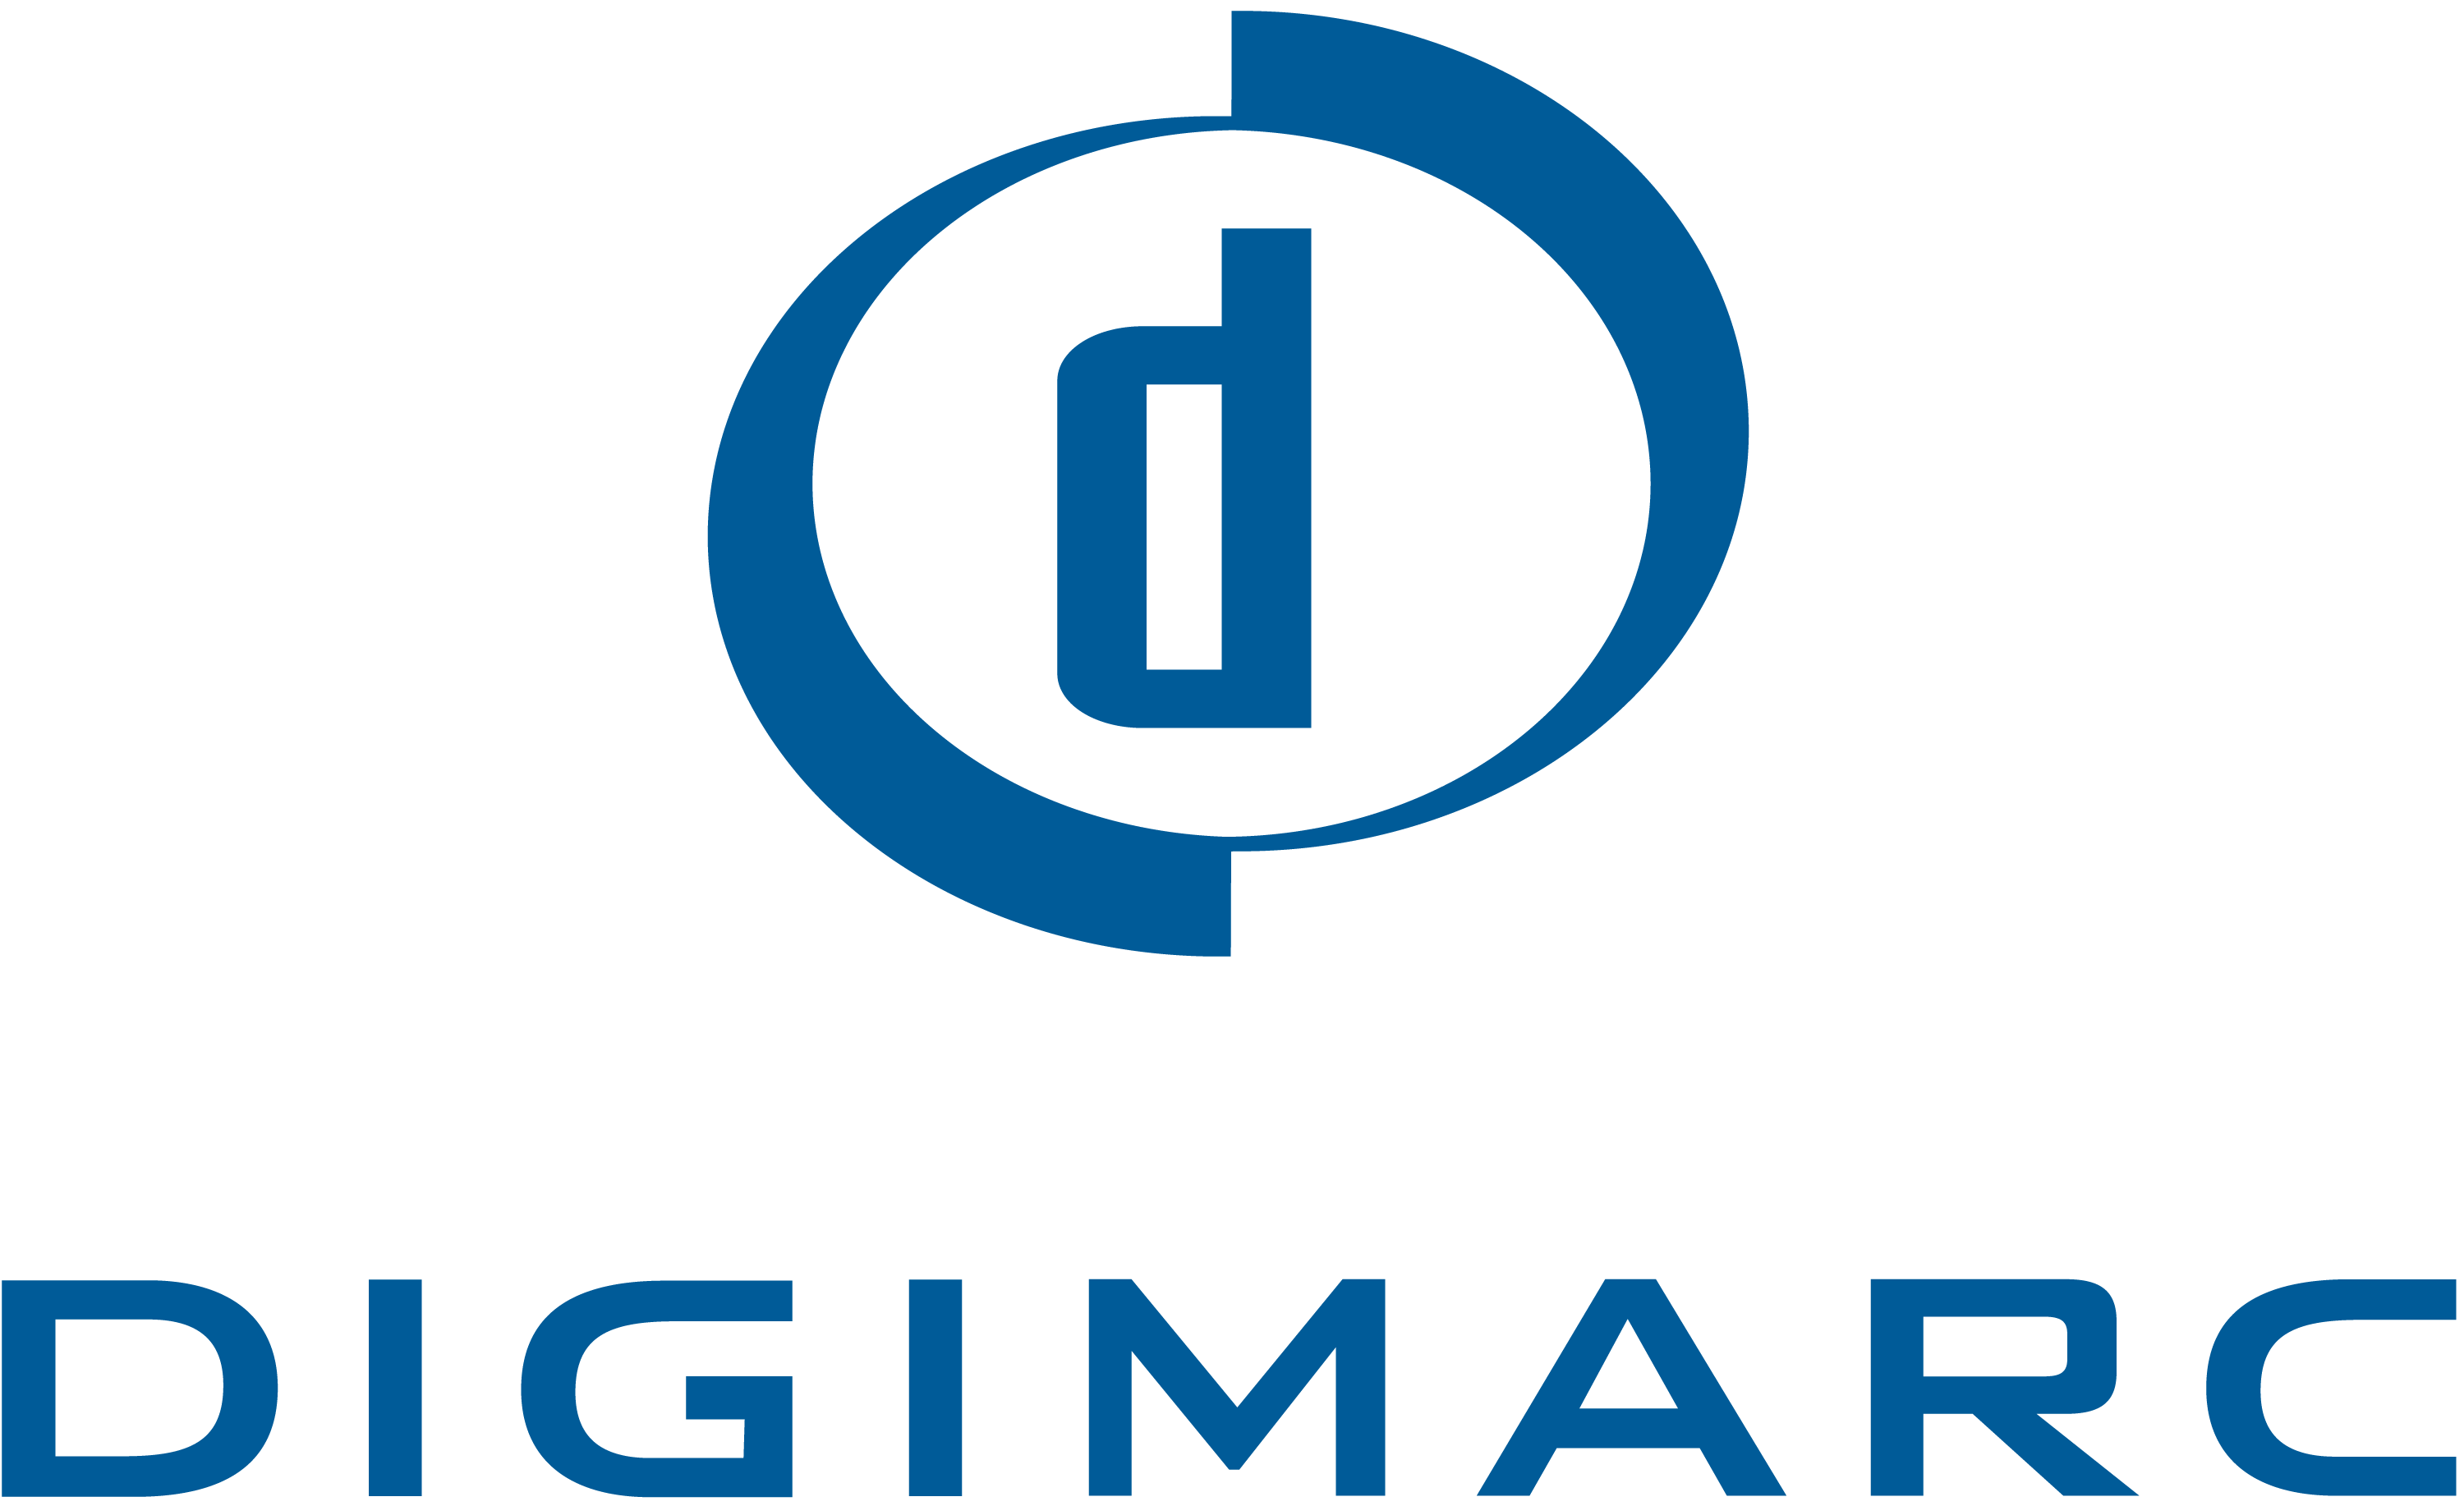 Digimarc Launches Brand Integrity Solution to Help Brands Combat Costly Counterfeiting and Product Diversion